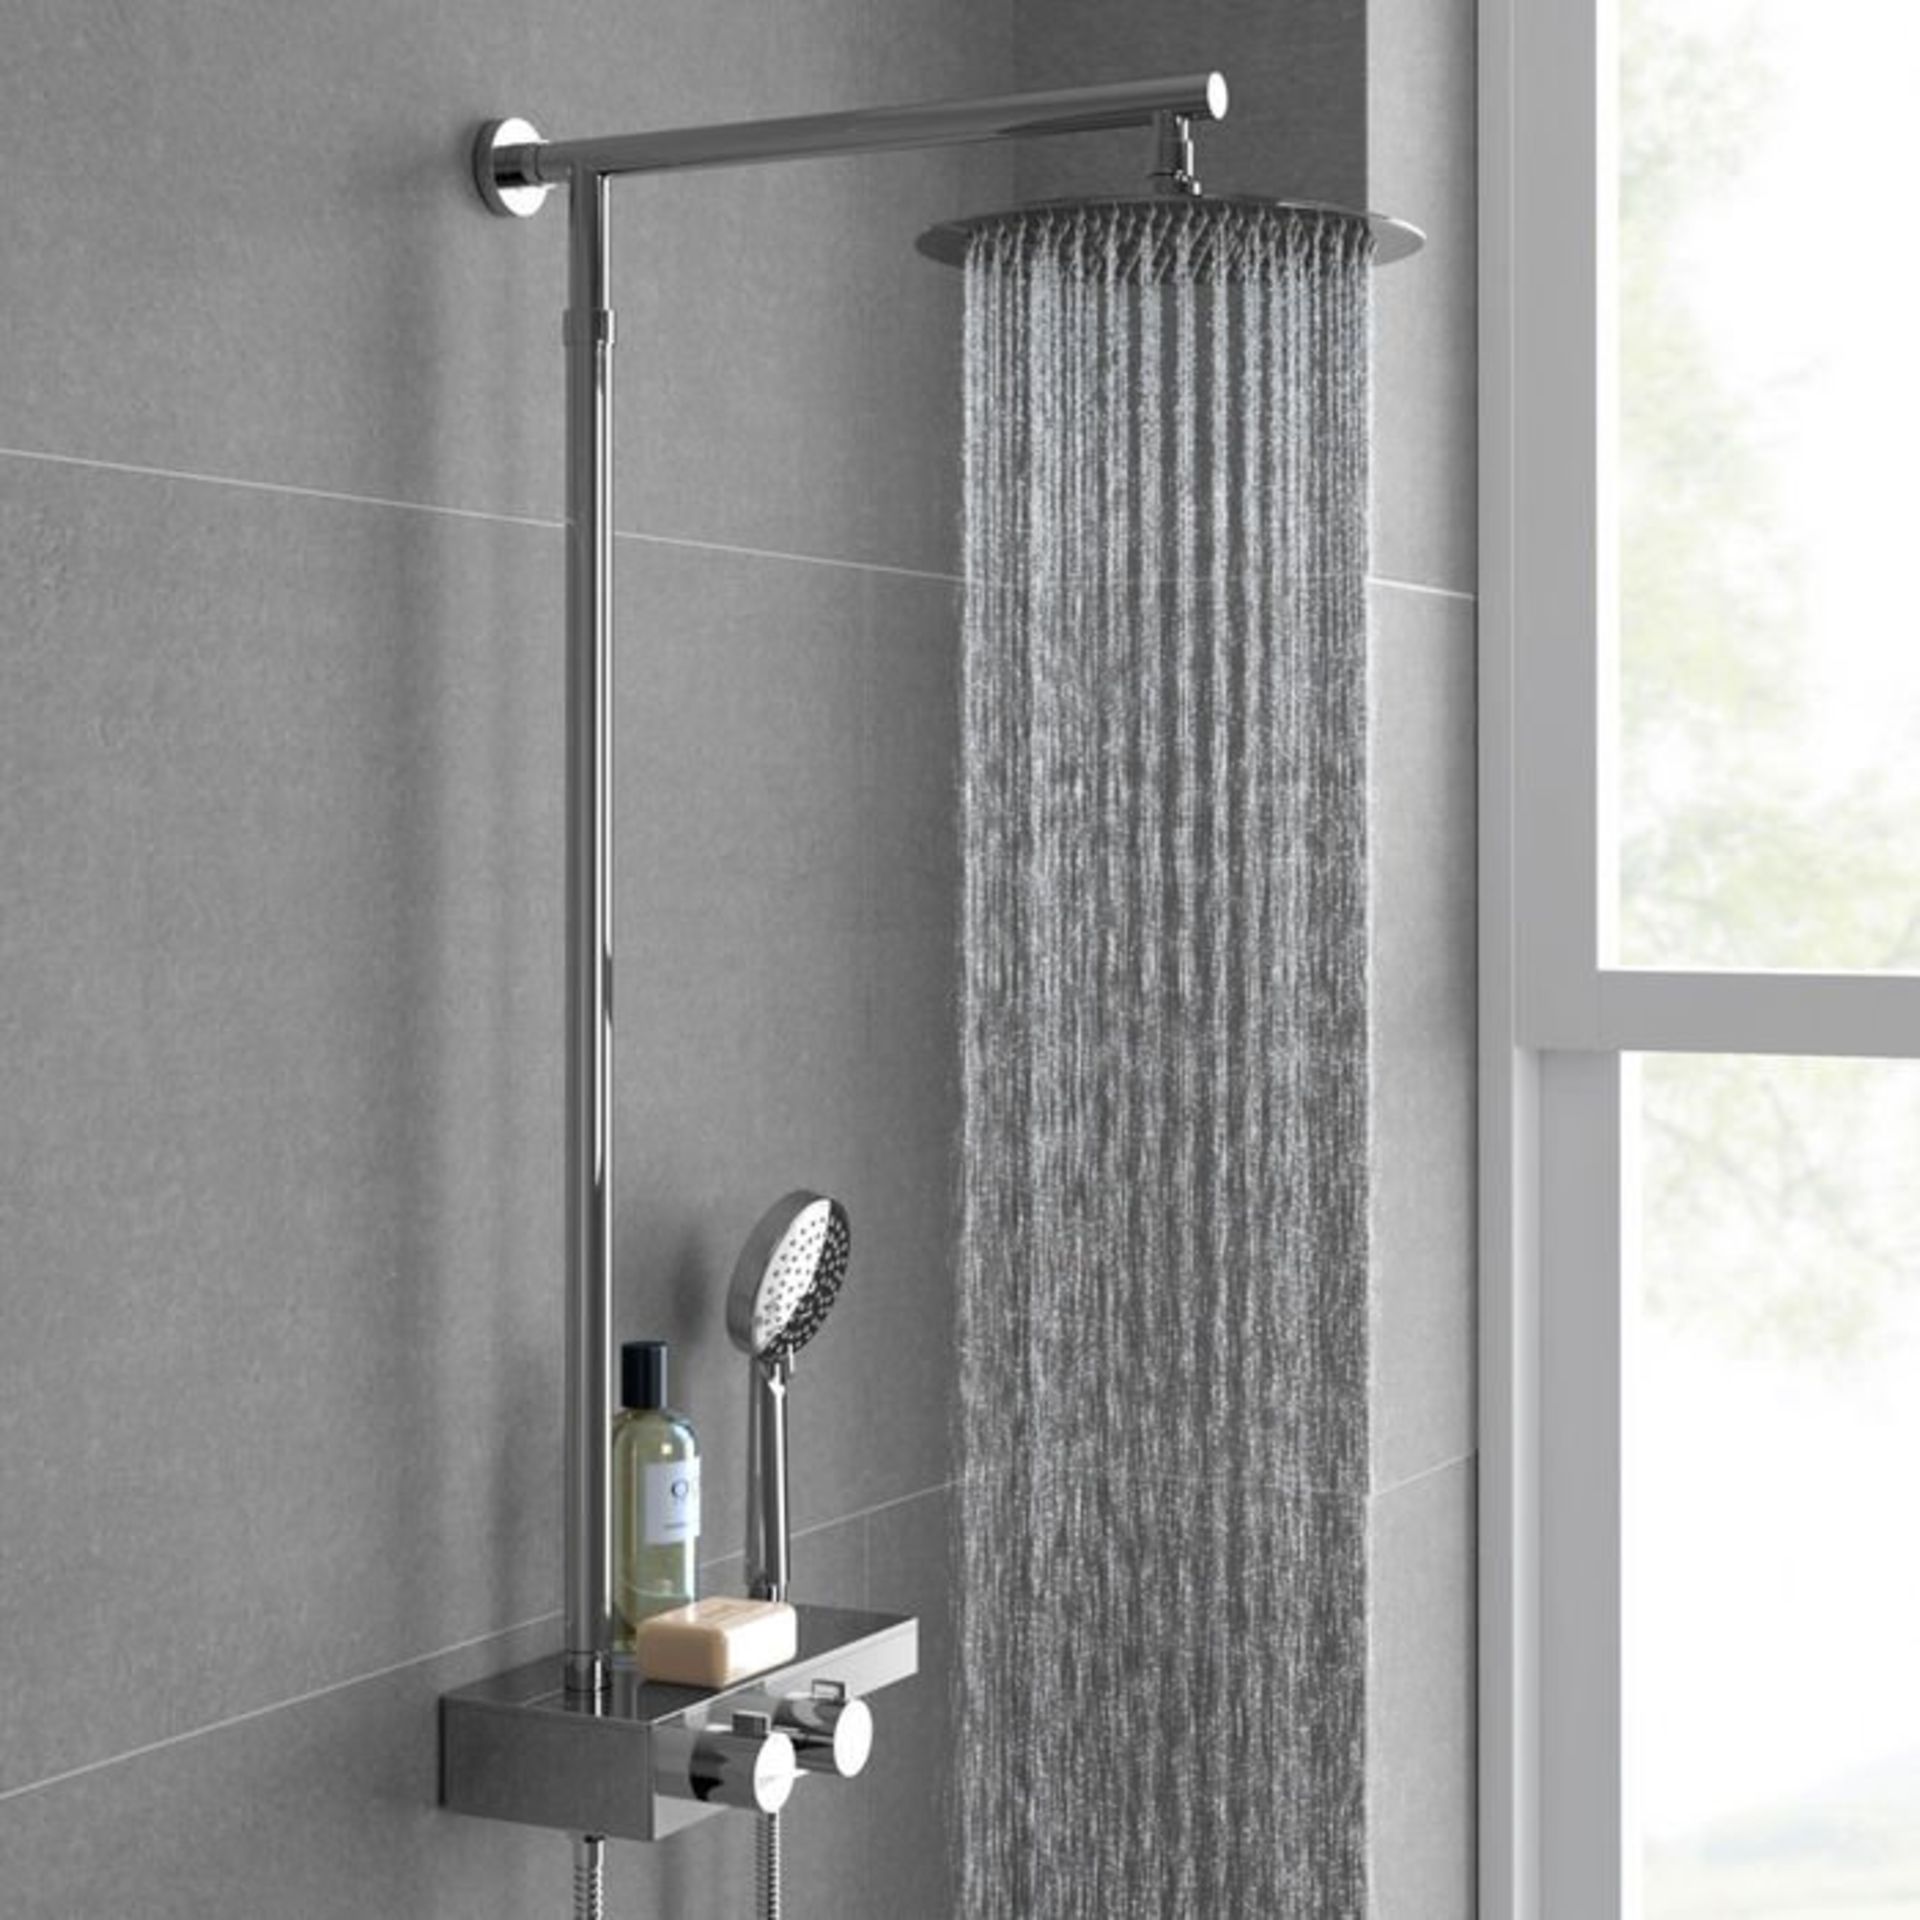 (H35) Round Exposed Thermostatic Mixer Shower Kit & Large Head. Cool to touch shower for